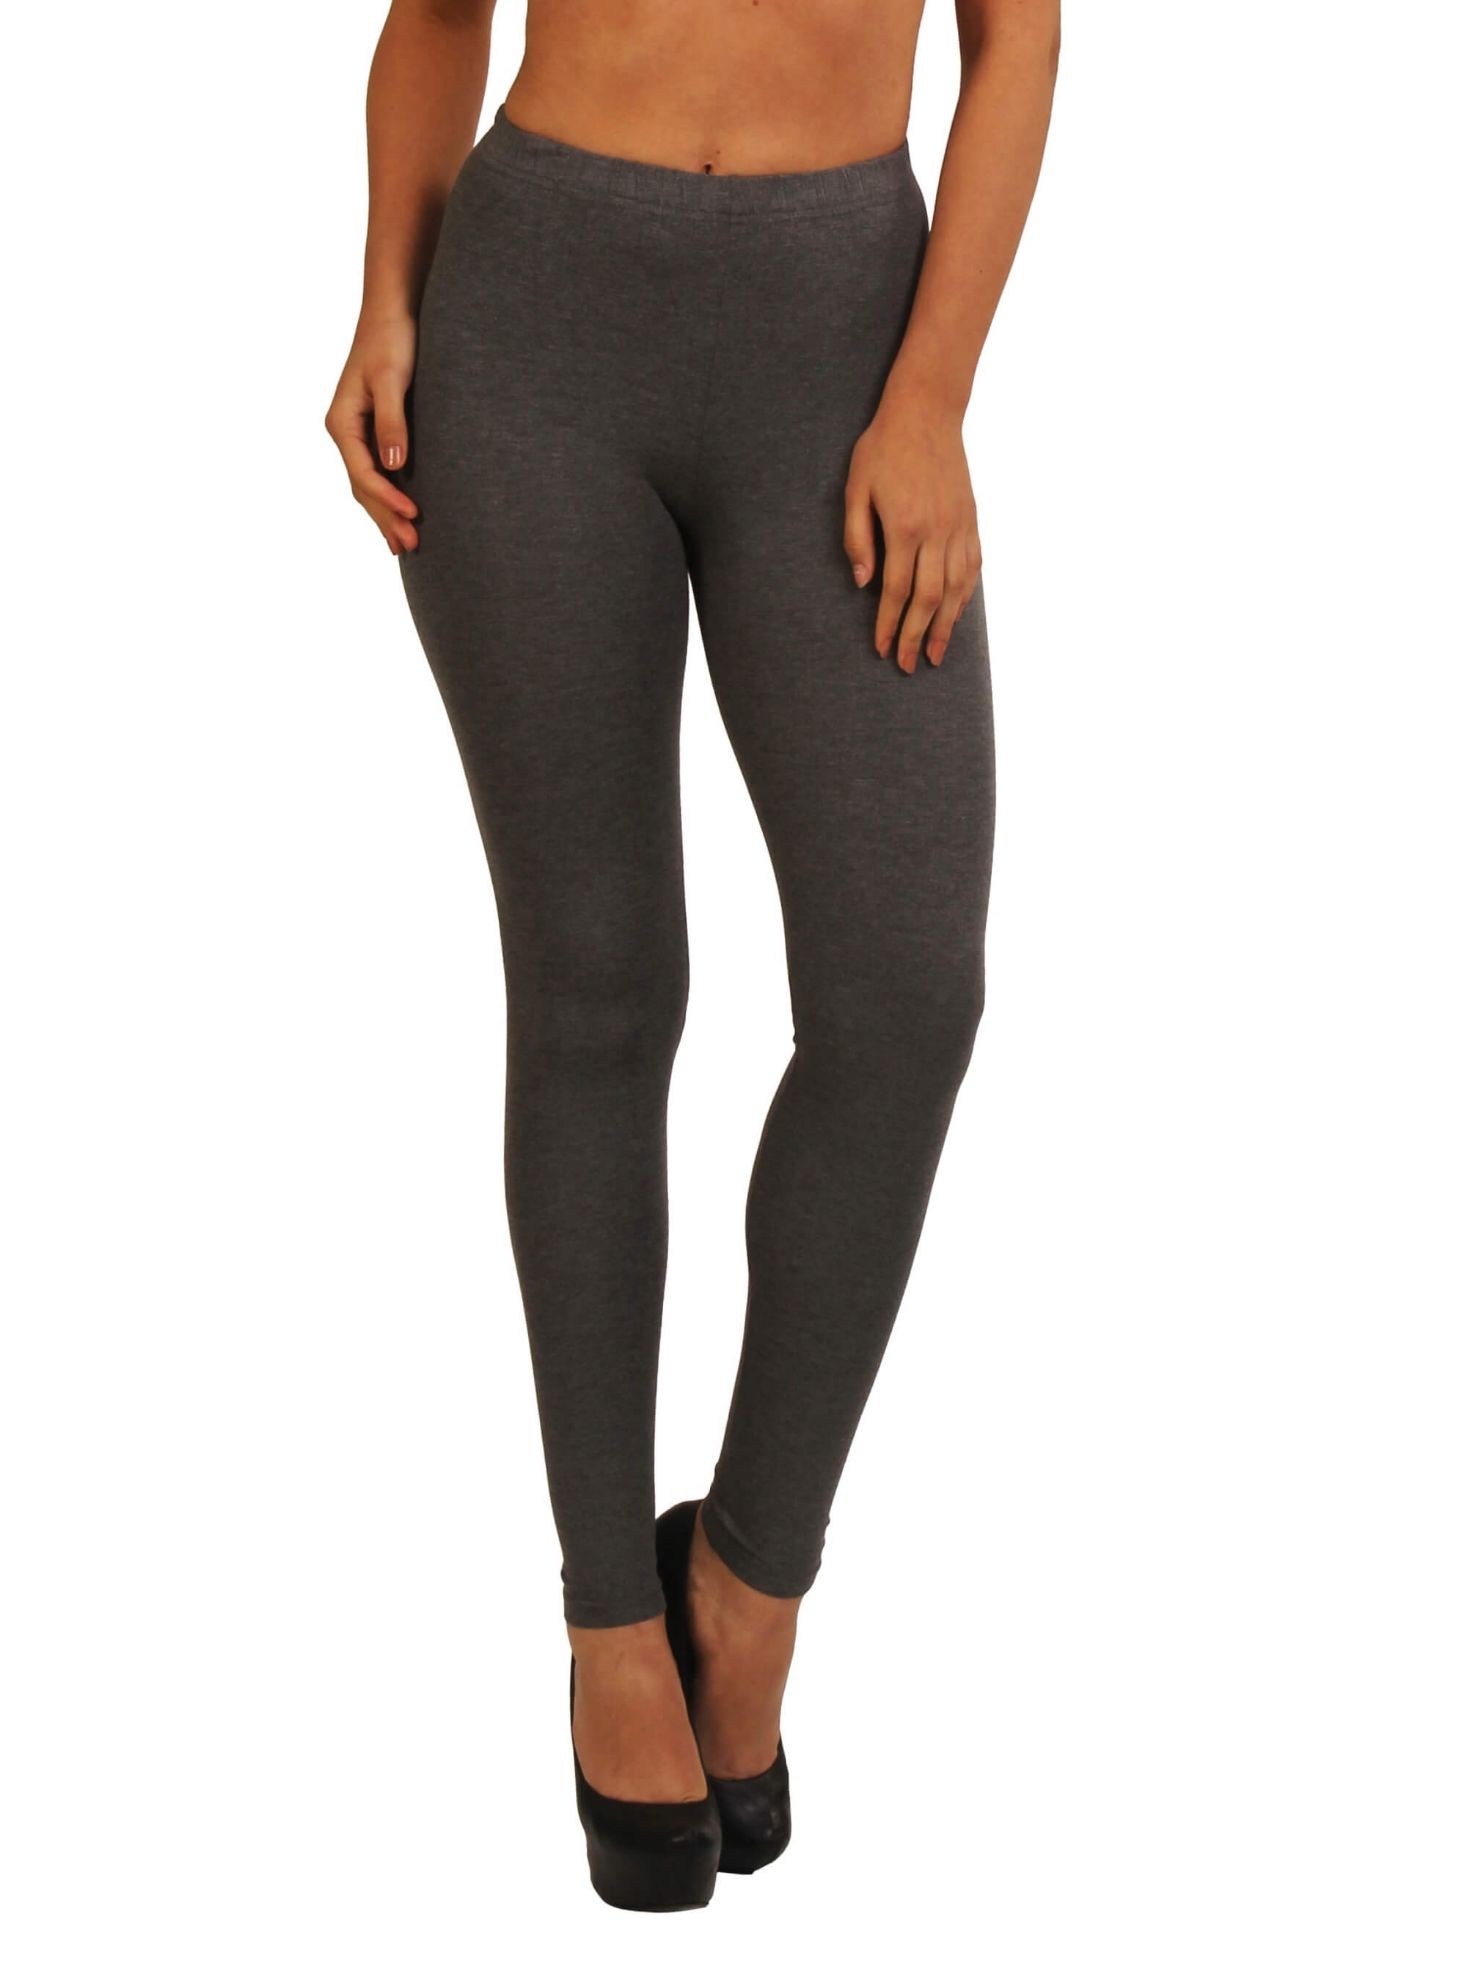 Frenchtrendz - Buy Cotton Spandex Ankle Leggings from Frenchtrendz